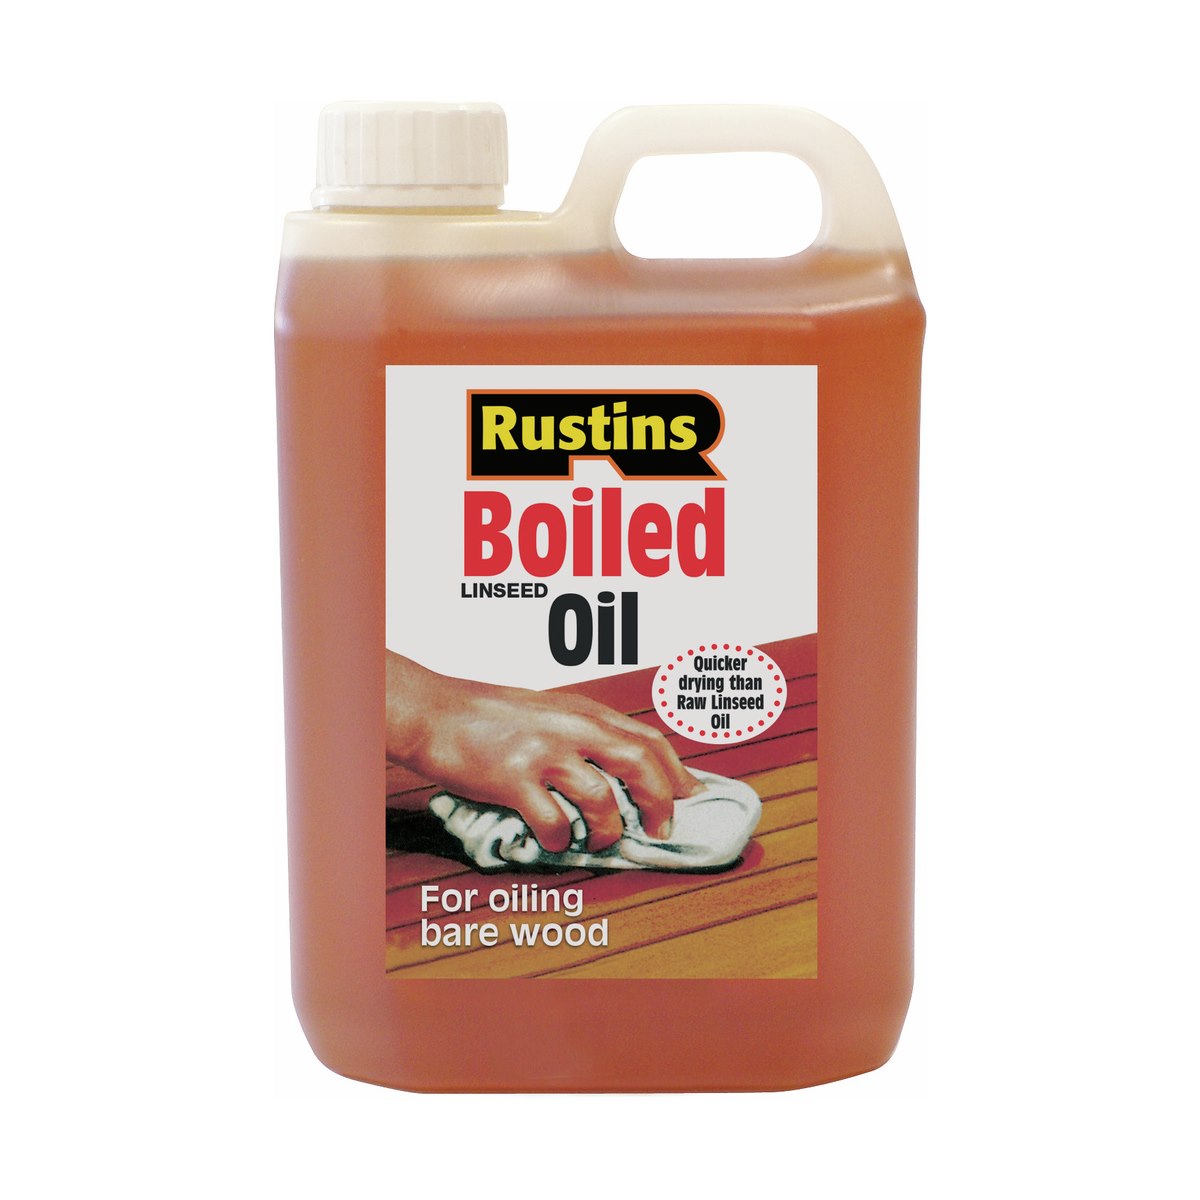 Rustins Boiled Linseed Oil 4 Litre